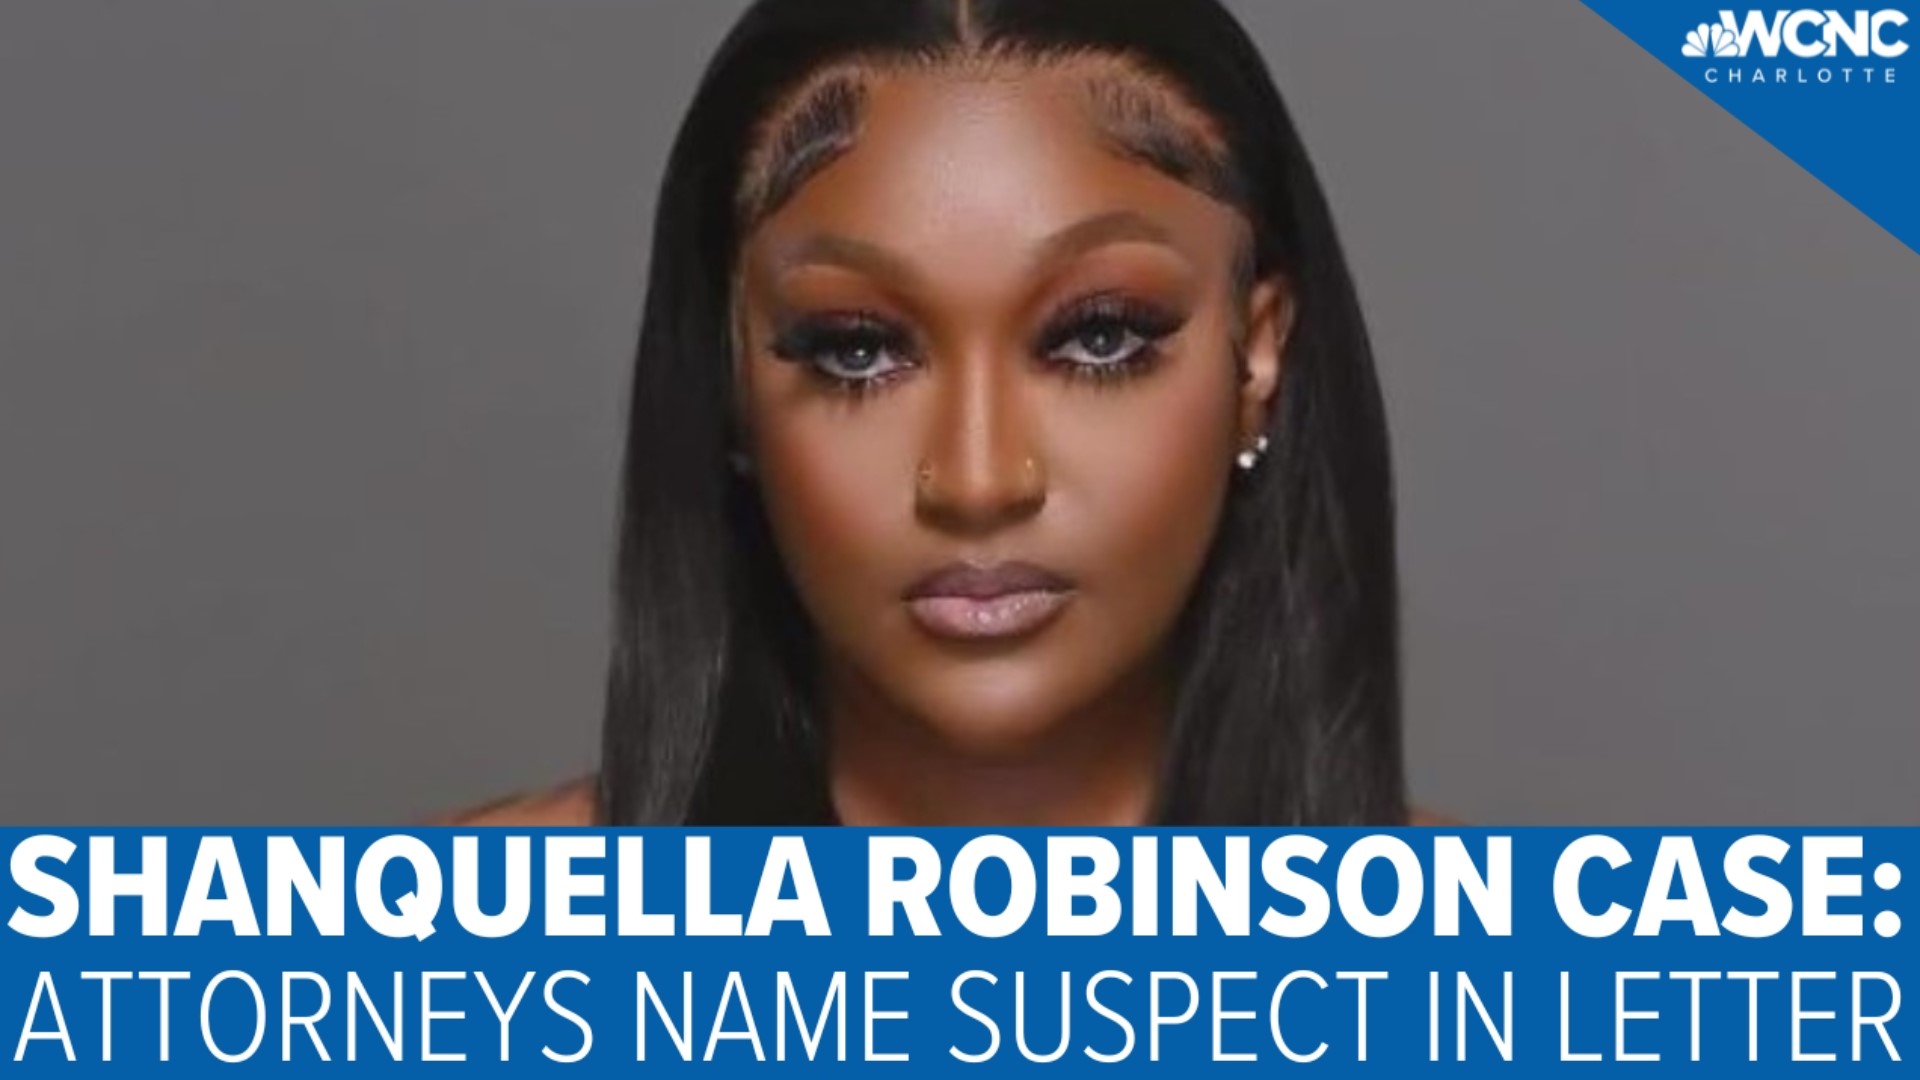 Attorneys representing the family of Shanquella Robinson have identified the woman they say is wanted by Mexican authorities for her killing while on vacation.